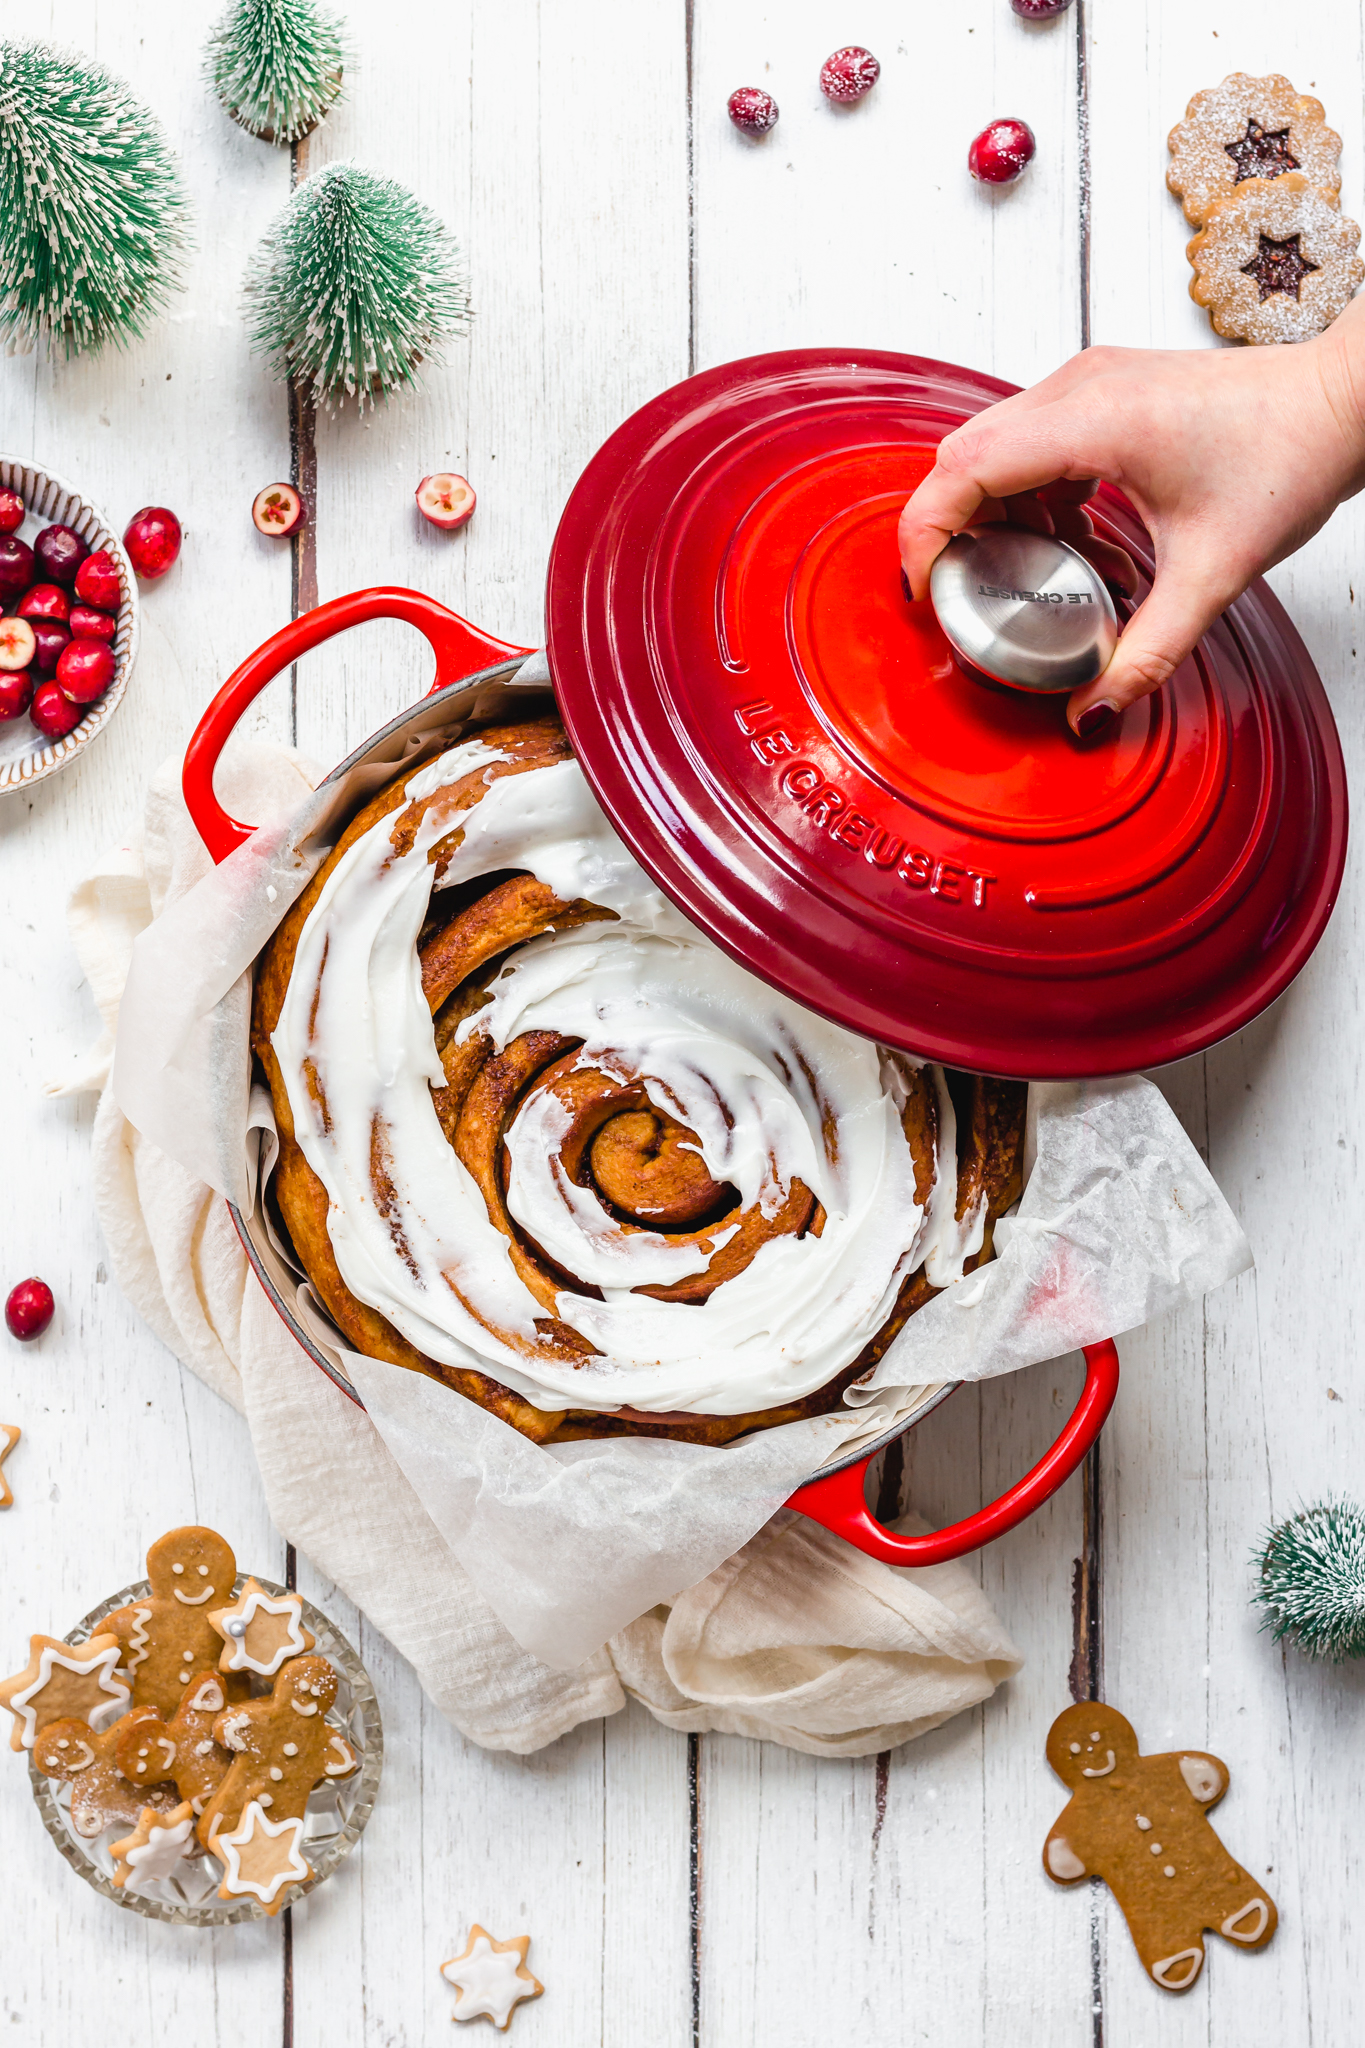 Giant Gingerbread Cinnamon Roll in a red casserole dish